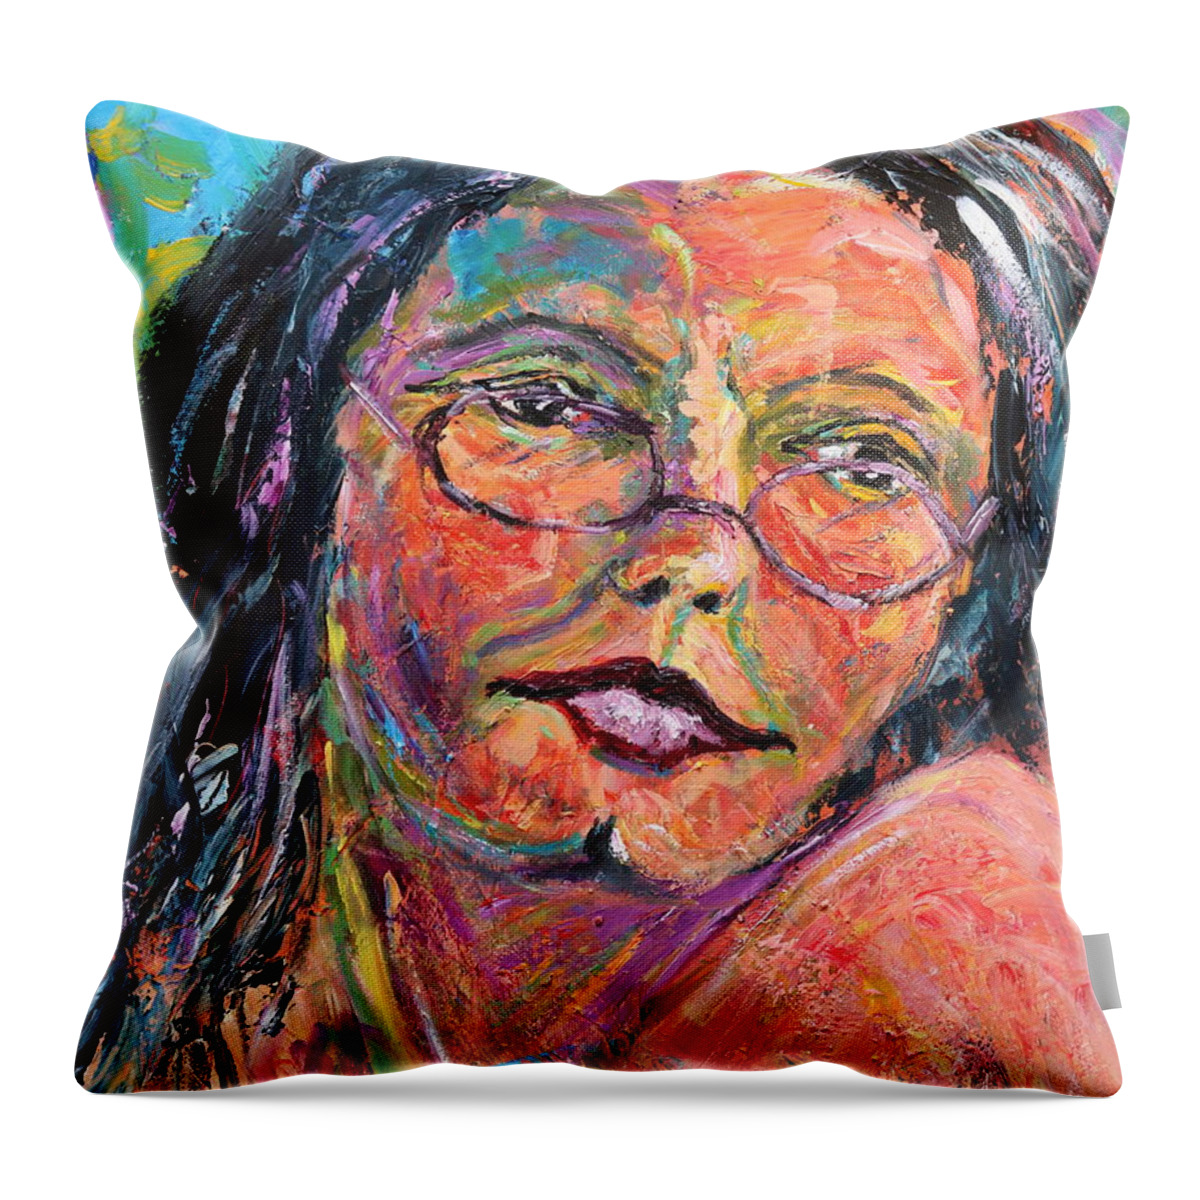 Portrait Throw Pillow featuring the painting Tell me more by Madeleine Shulman